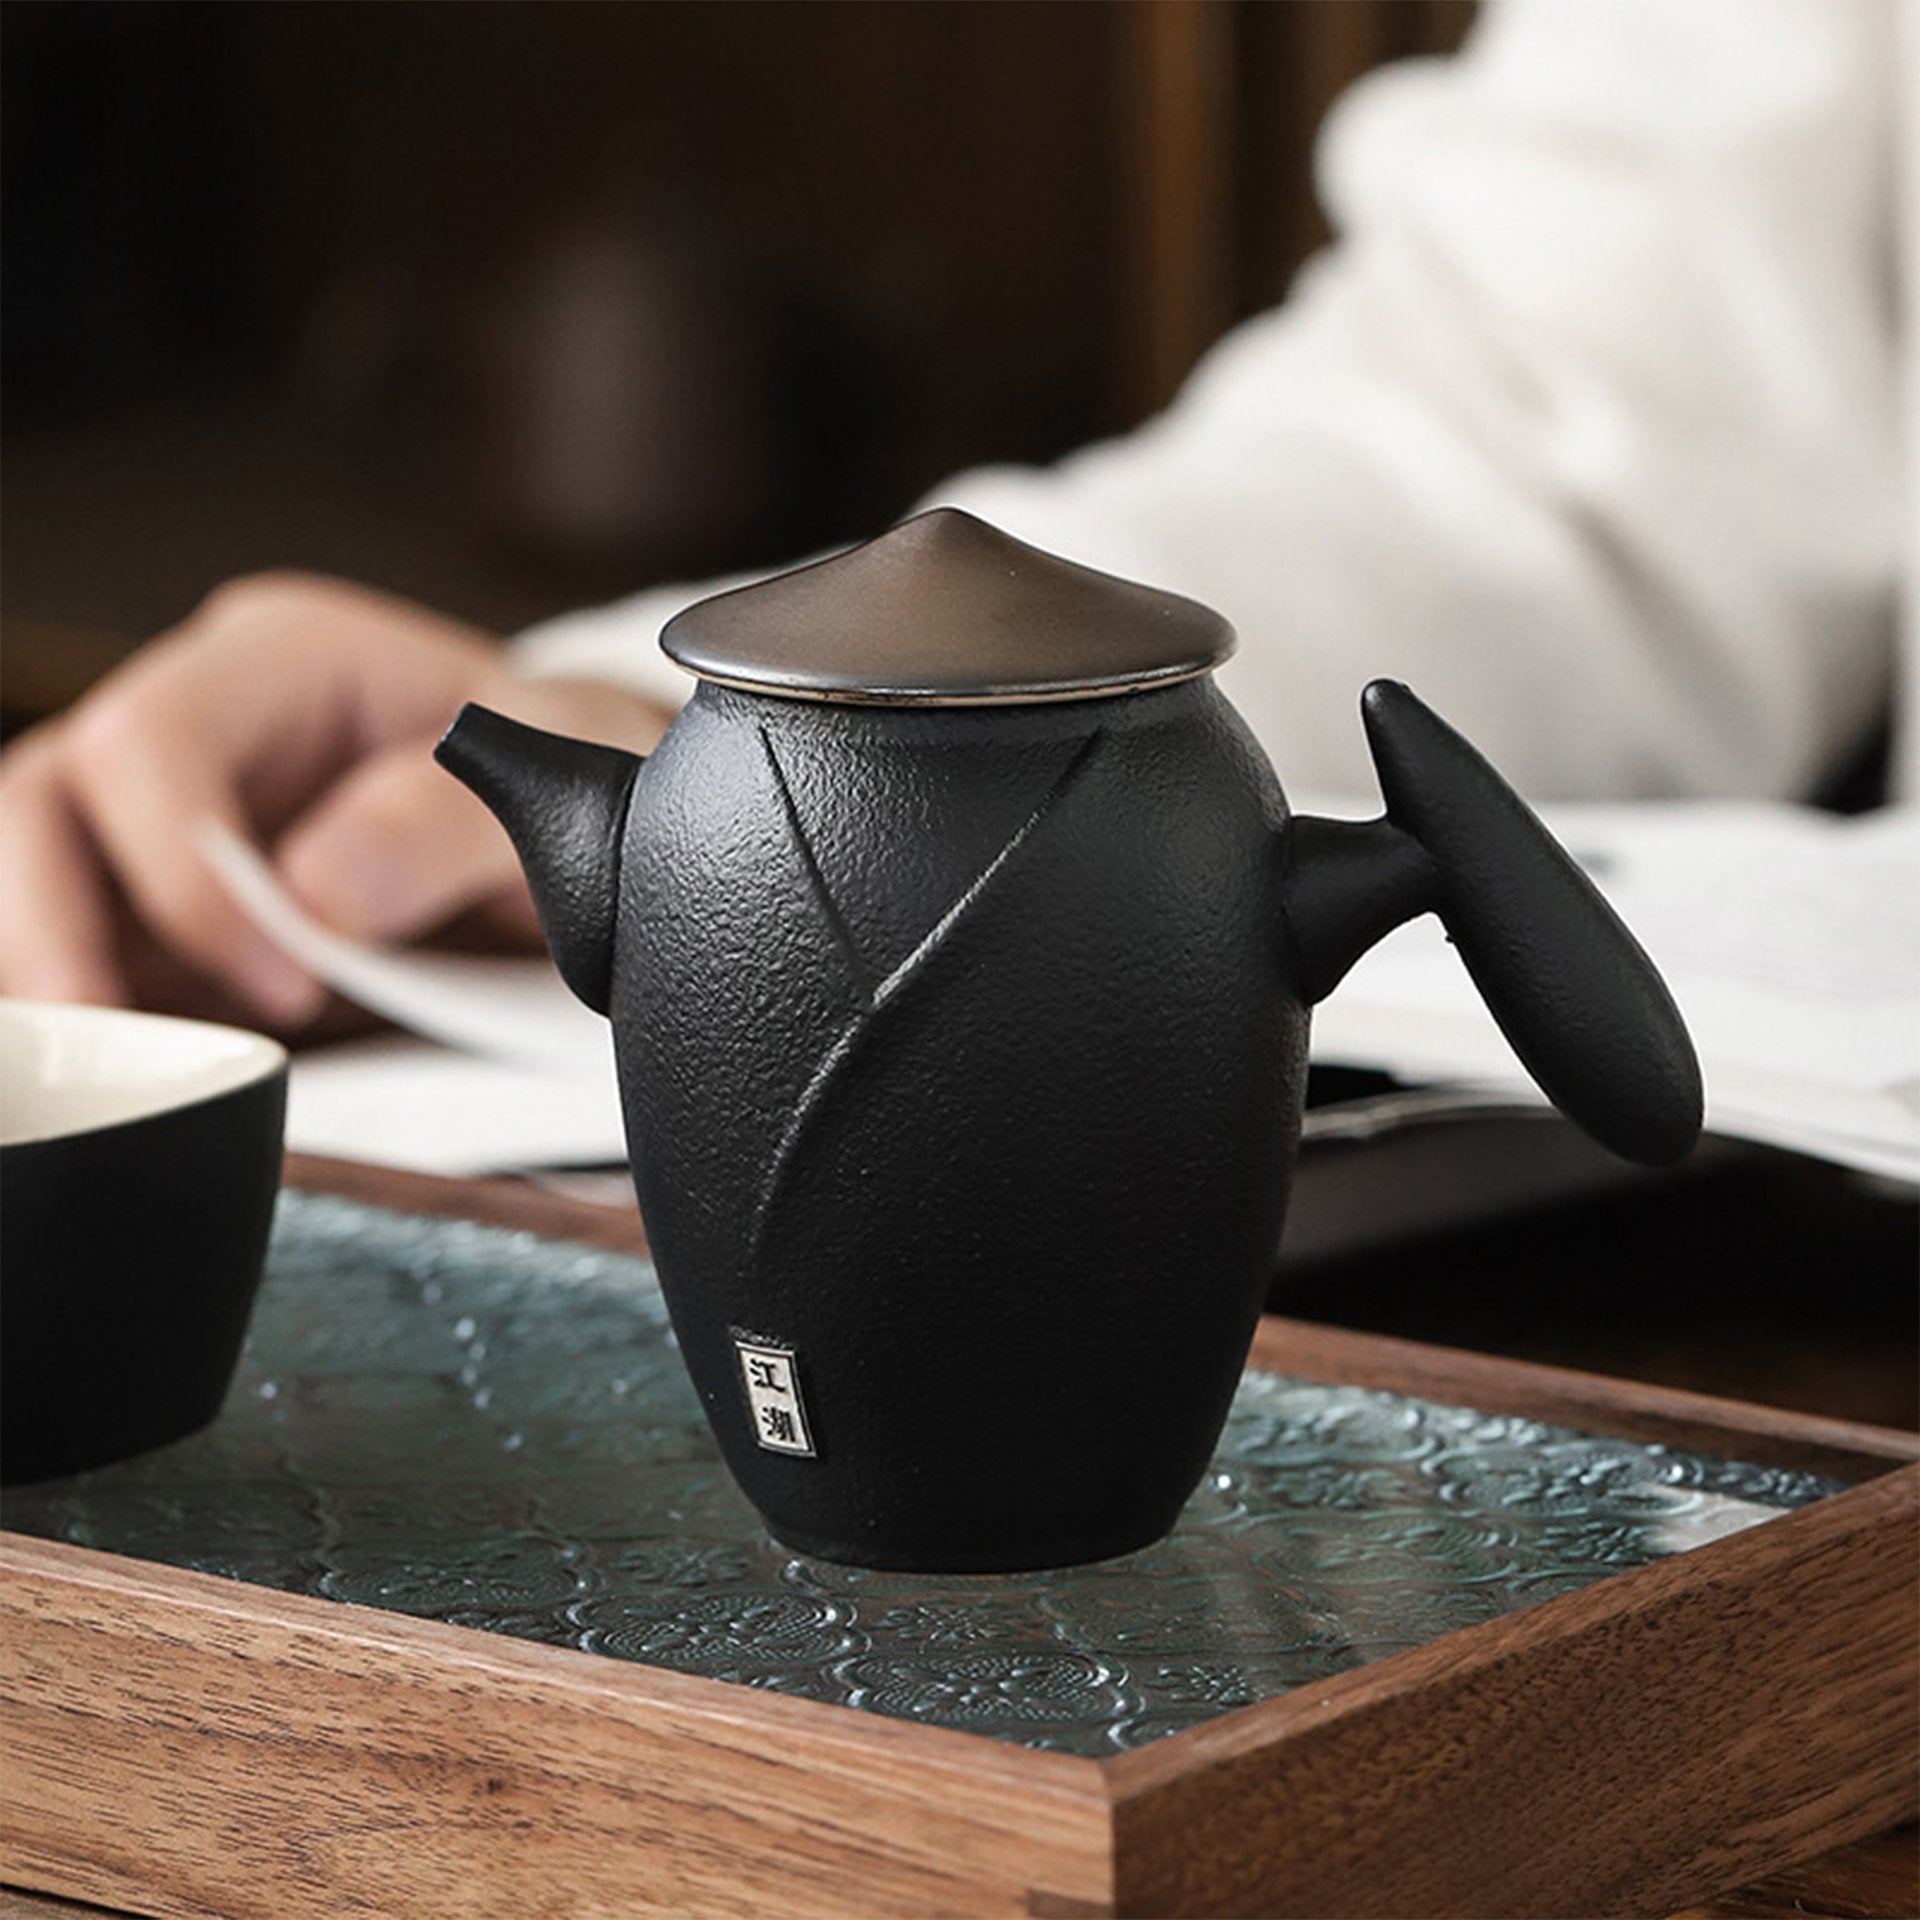 Matte black teapot with lid on wooden tray, person reading in the background.